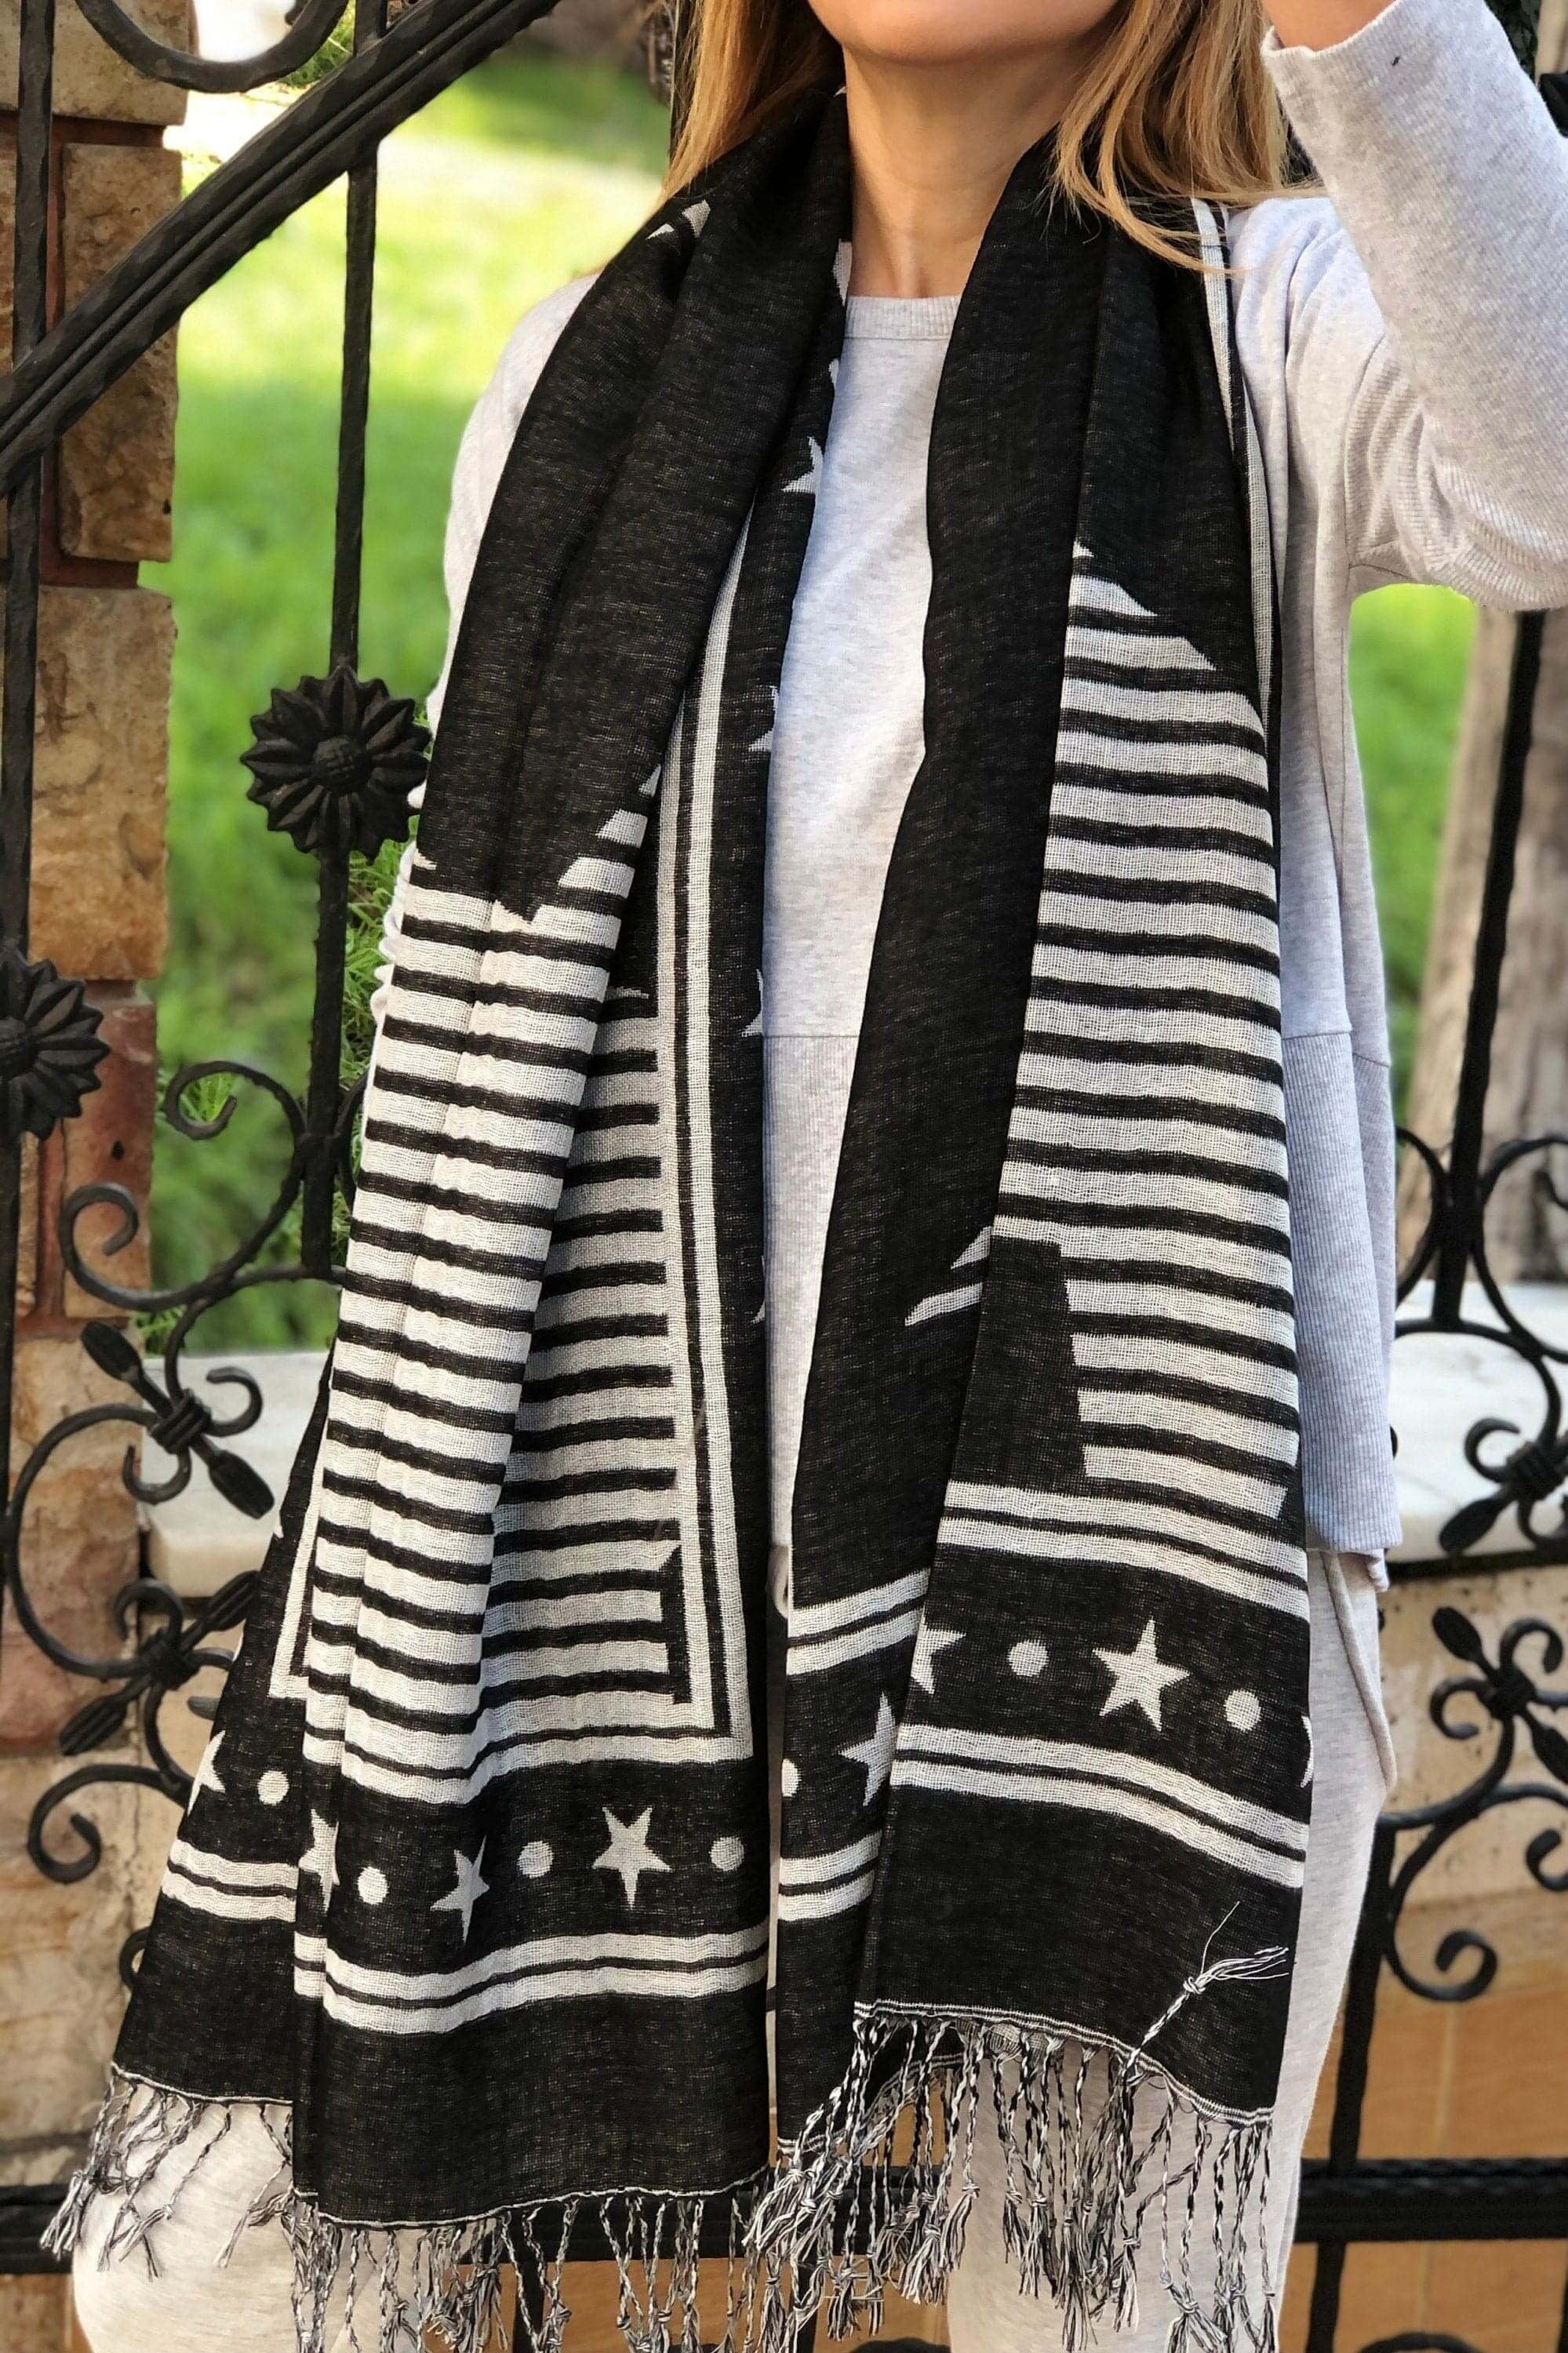 Black & White Acrylic Cotton Scarf: A cozy, black and white scarf made with soft acrylic cotton, perfect for adding a touch of style to any outfit.